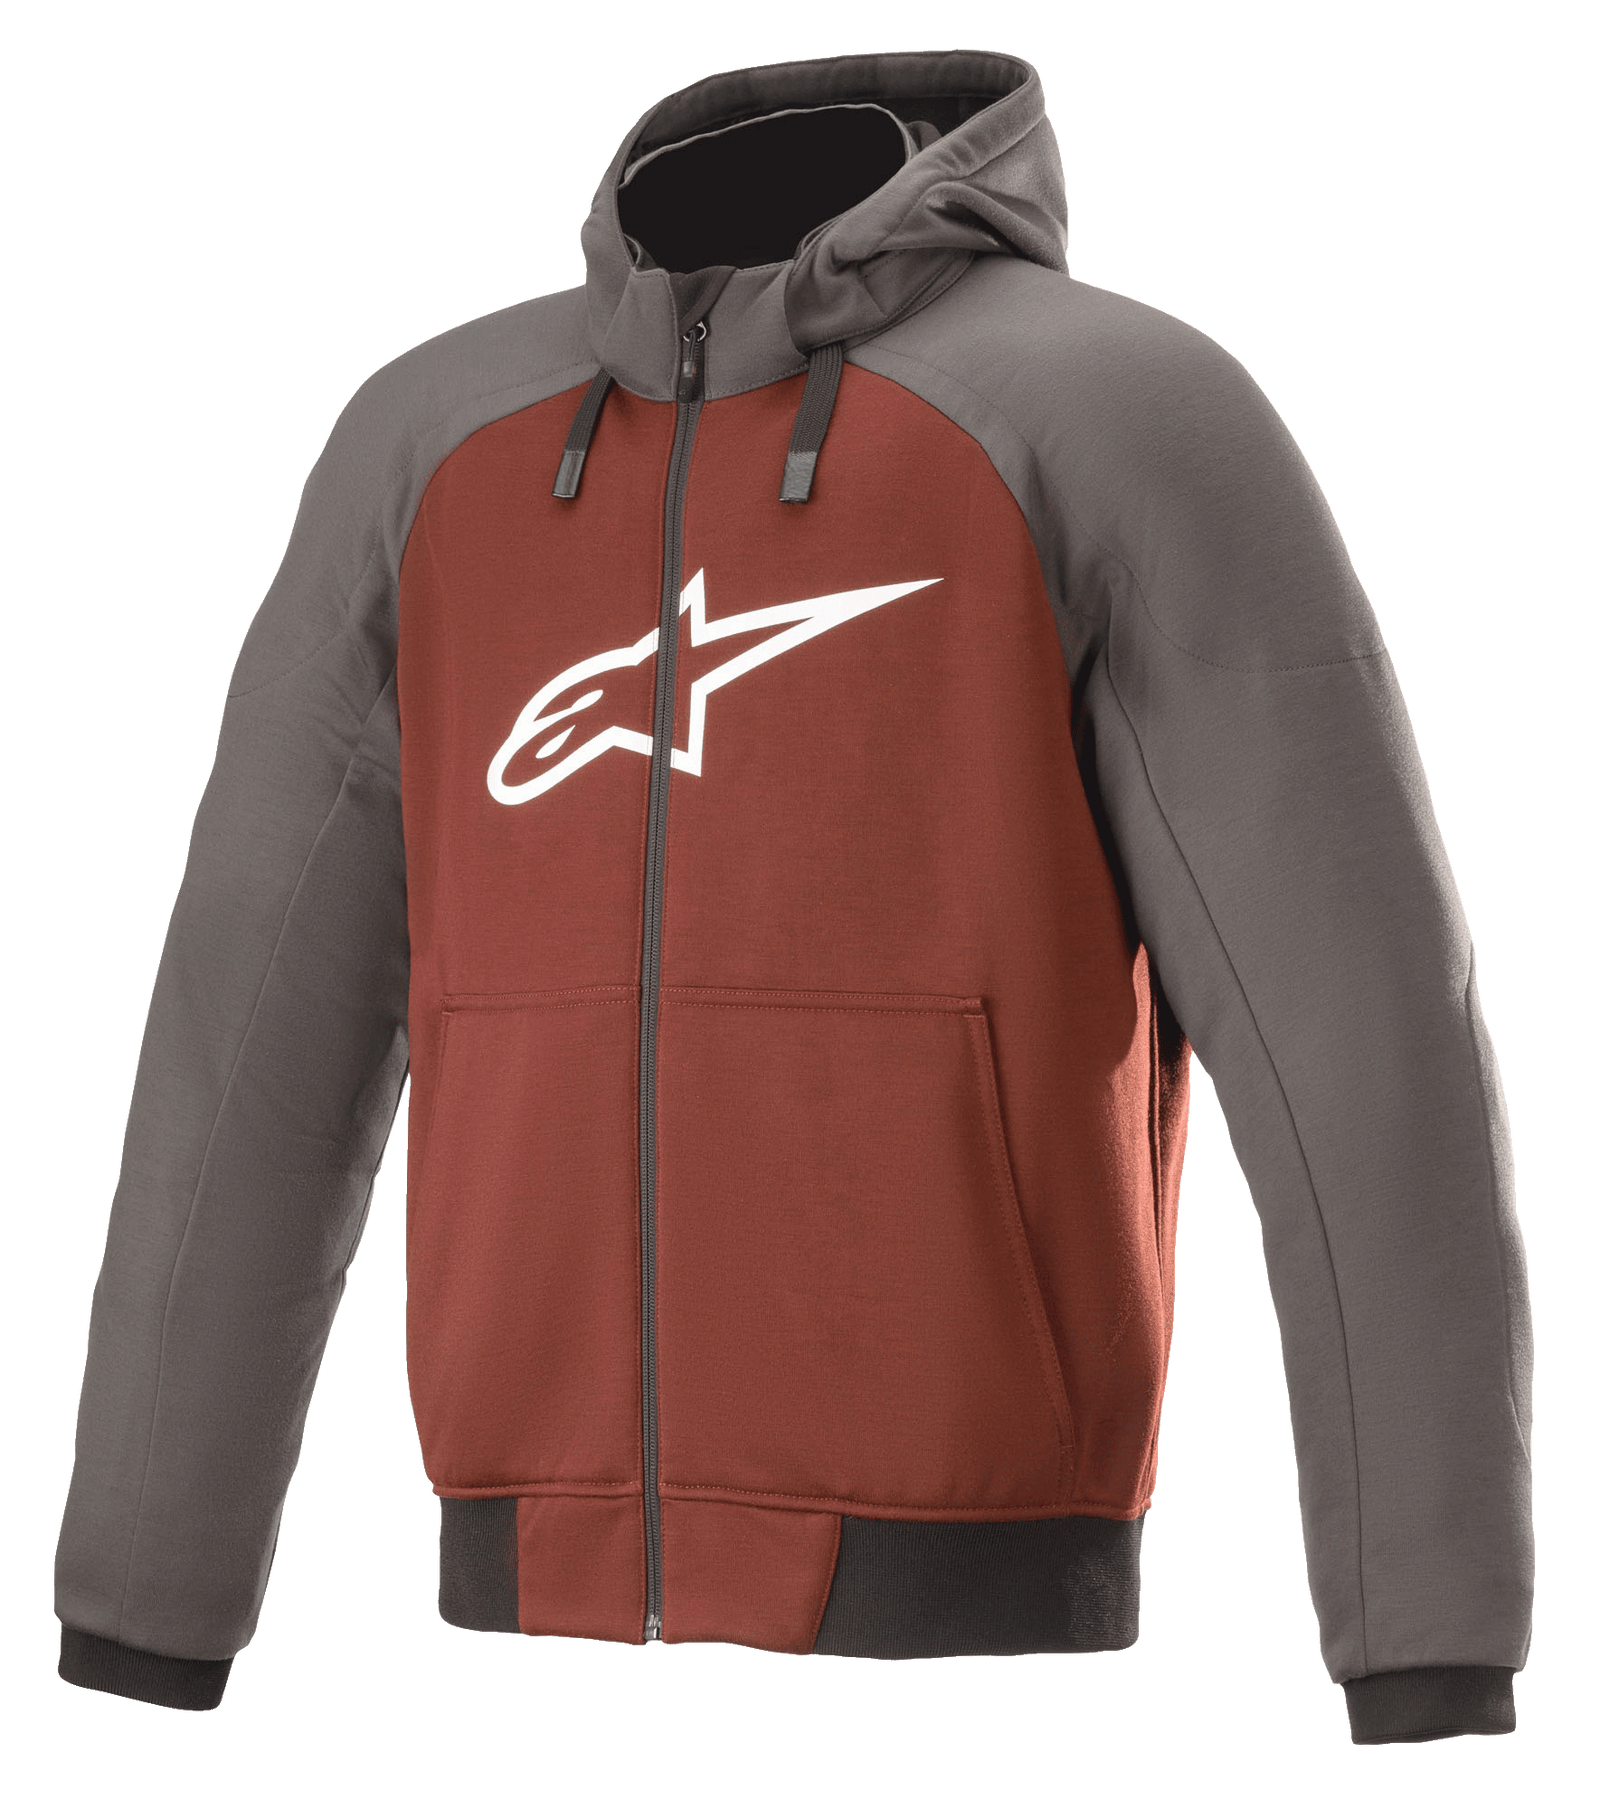 All Moto Sale items | Alpinestars® Official Site